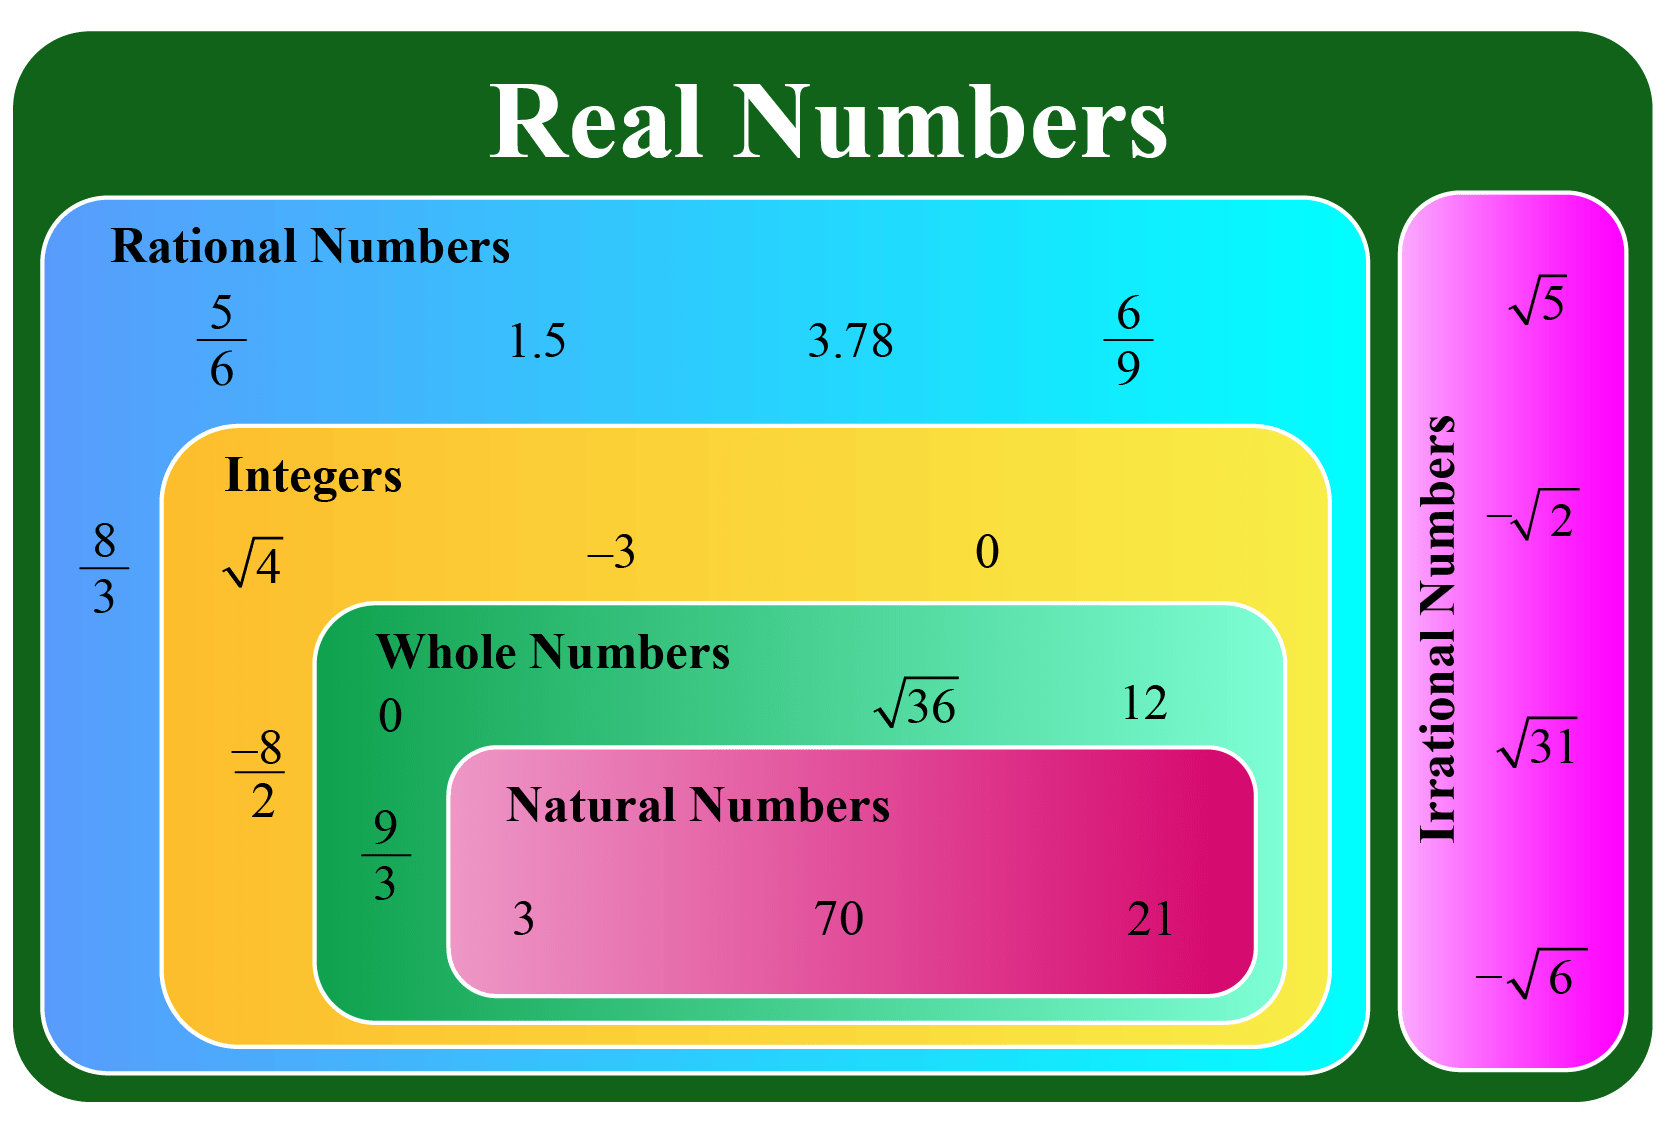 which-property-of-real-numbers-is-shown-below